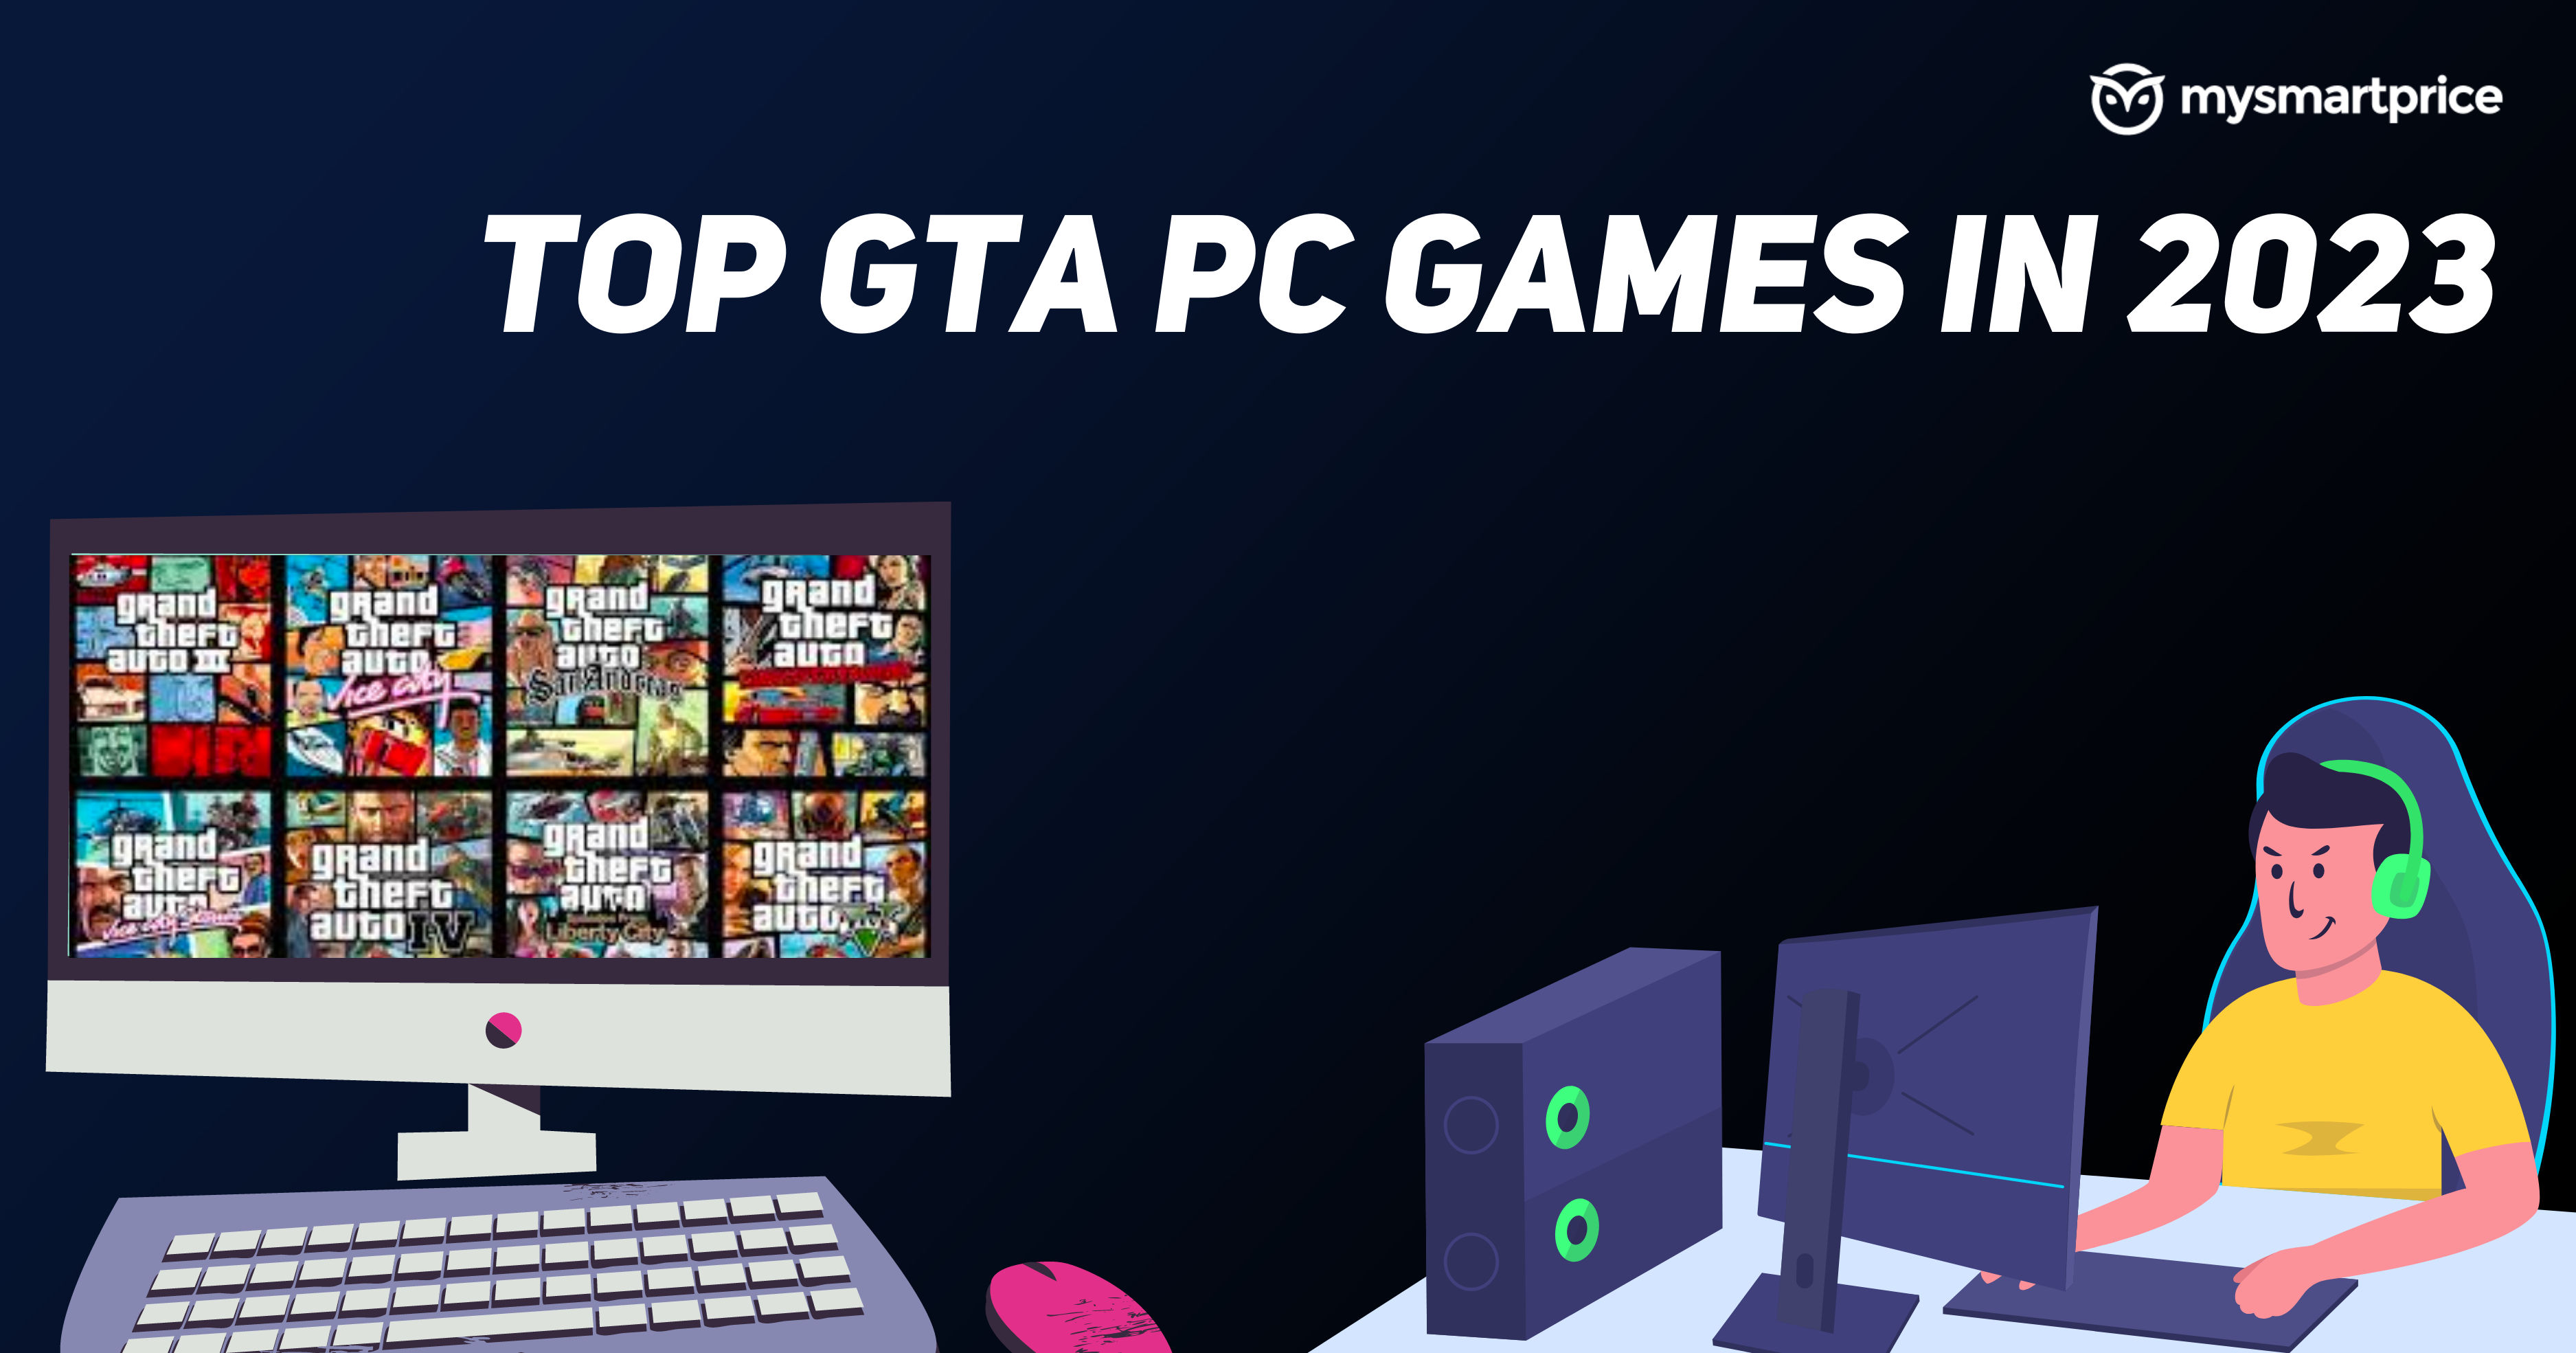 Top GTA PC Games in 2023: System Requirements, Metacritic Rating, Genre,  Download Links and More - MySmartPrice